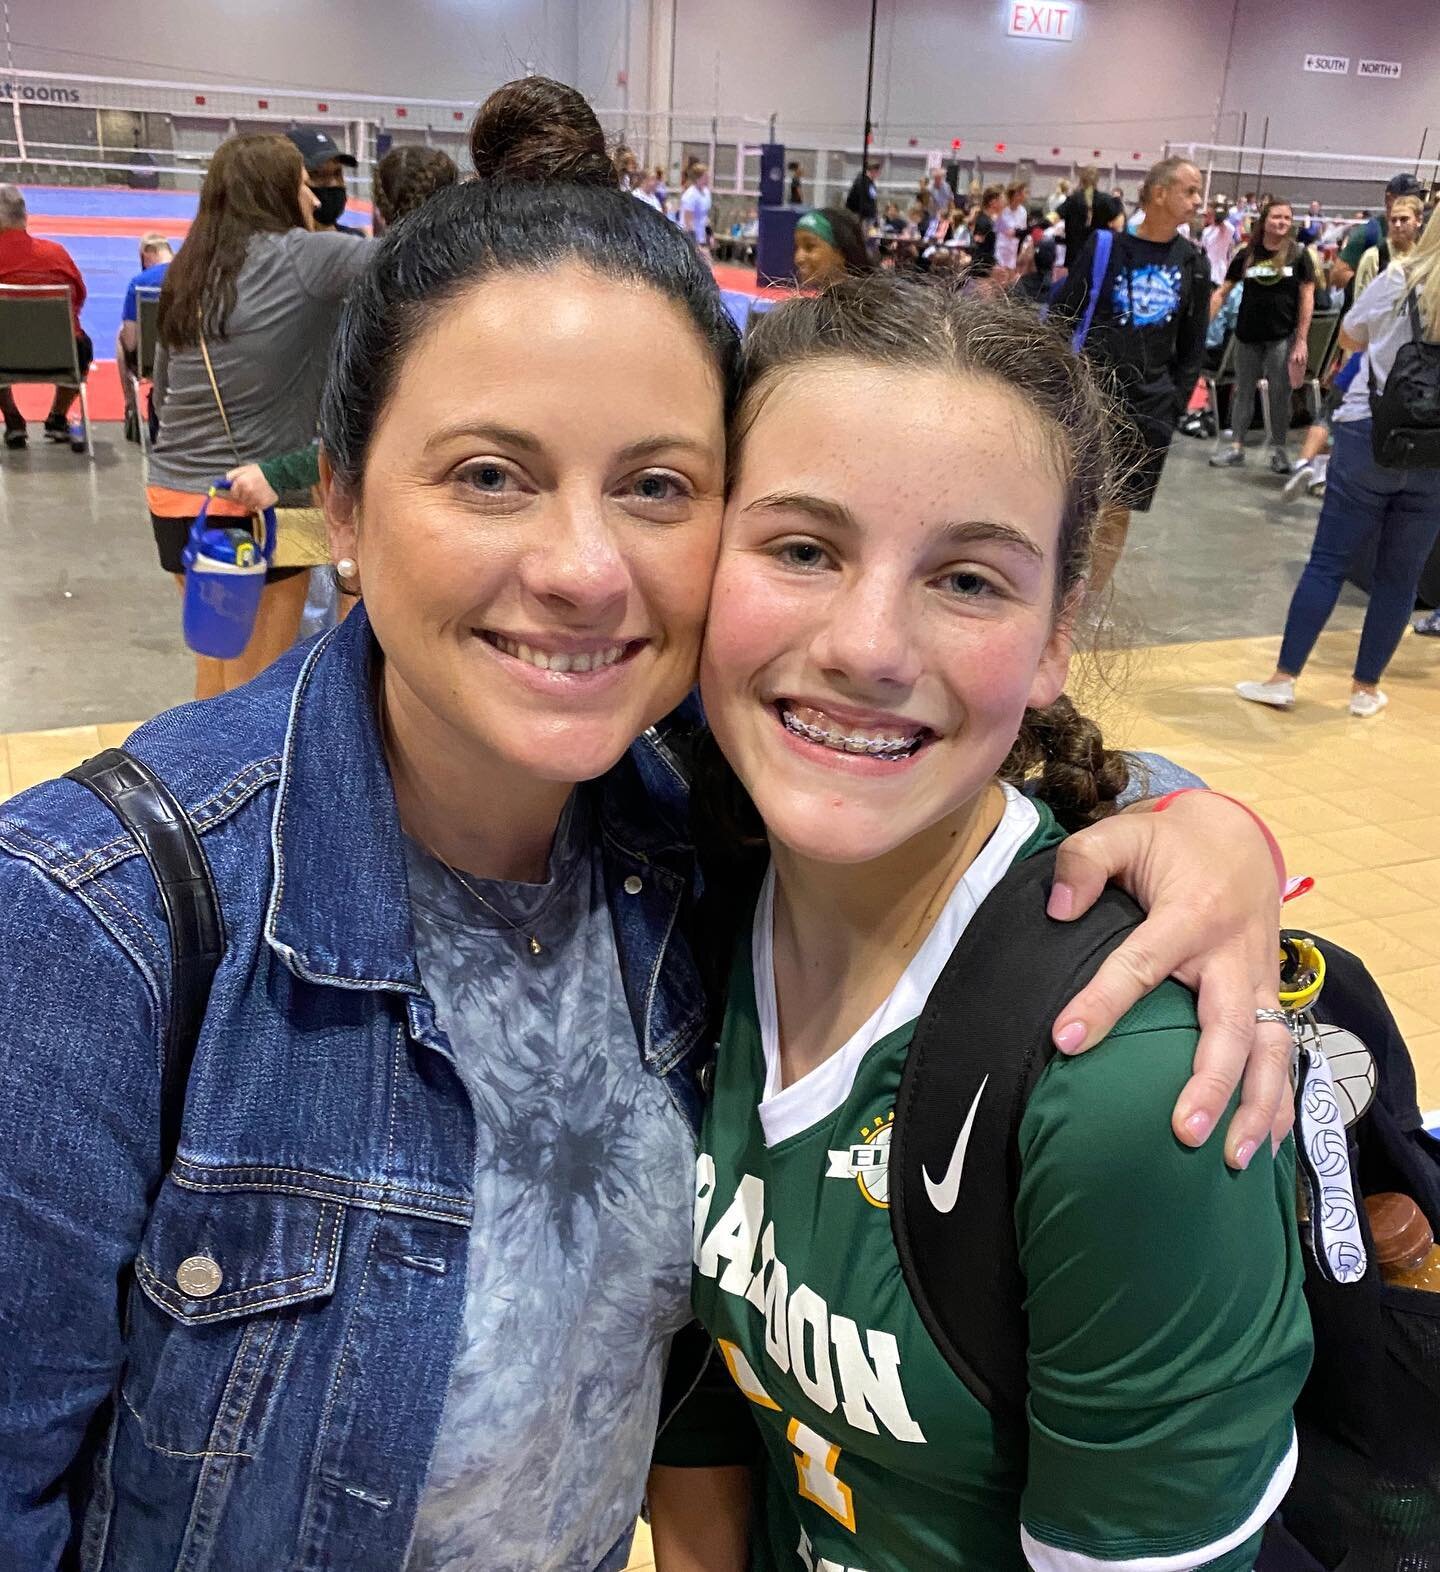 A little personal post here&hellip; I have been a little MIA from work for the past couple of weeks between a much needed relaxing trip to CO with my oldest followed by the last 4 days in Orlando cheering her on while she competes in a volleyball tou